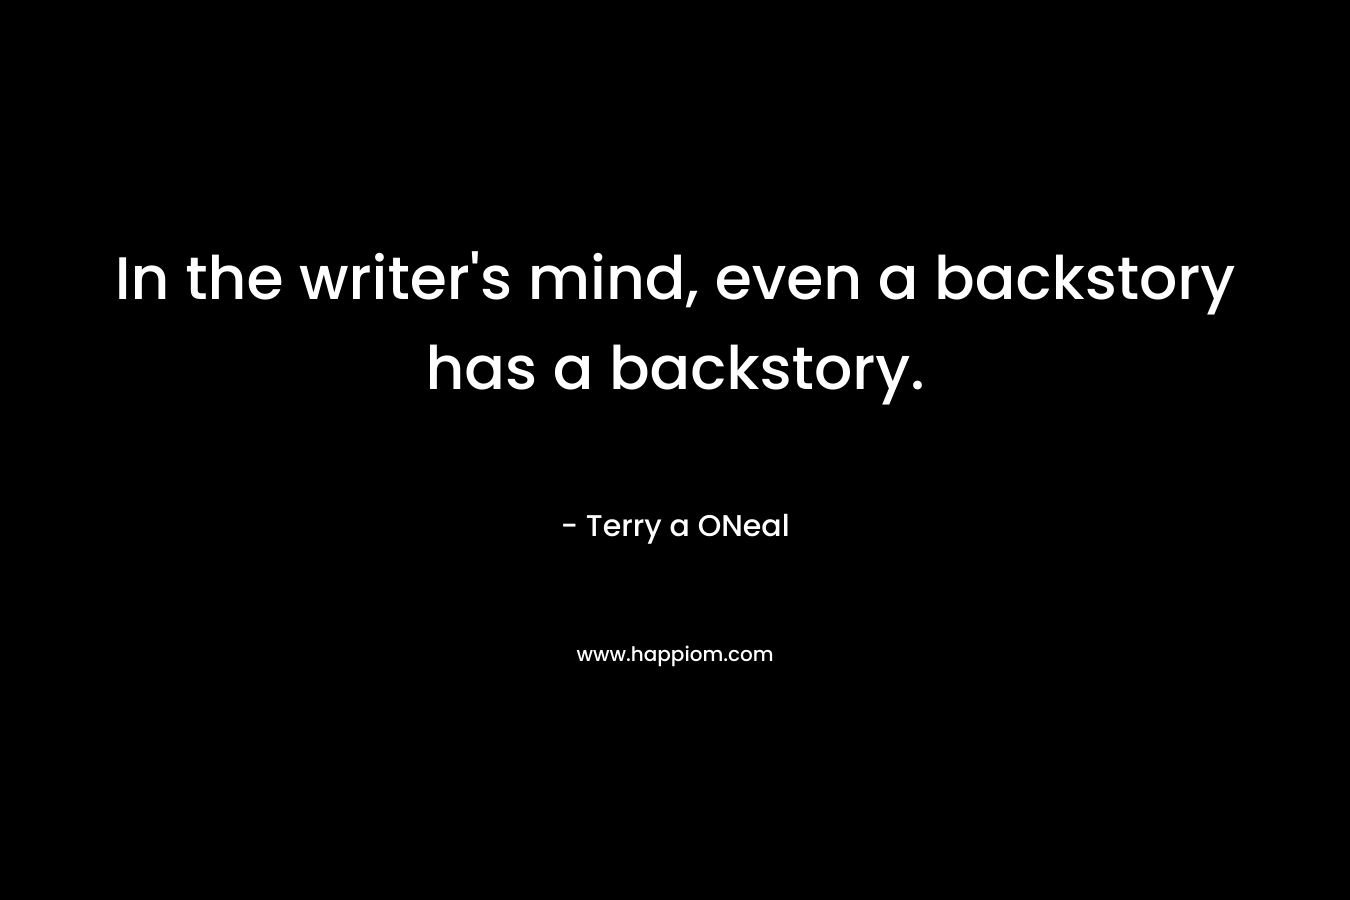 In the writer's mind, even a backstory has a backstory.